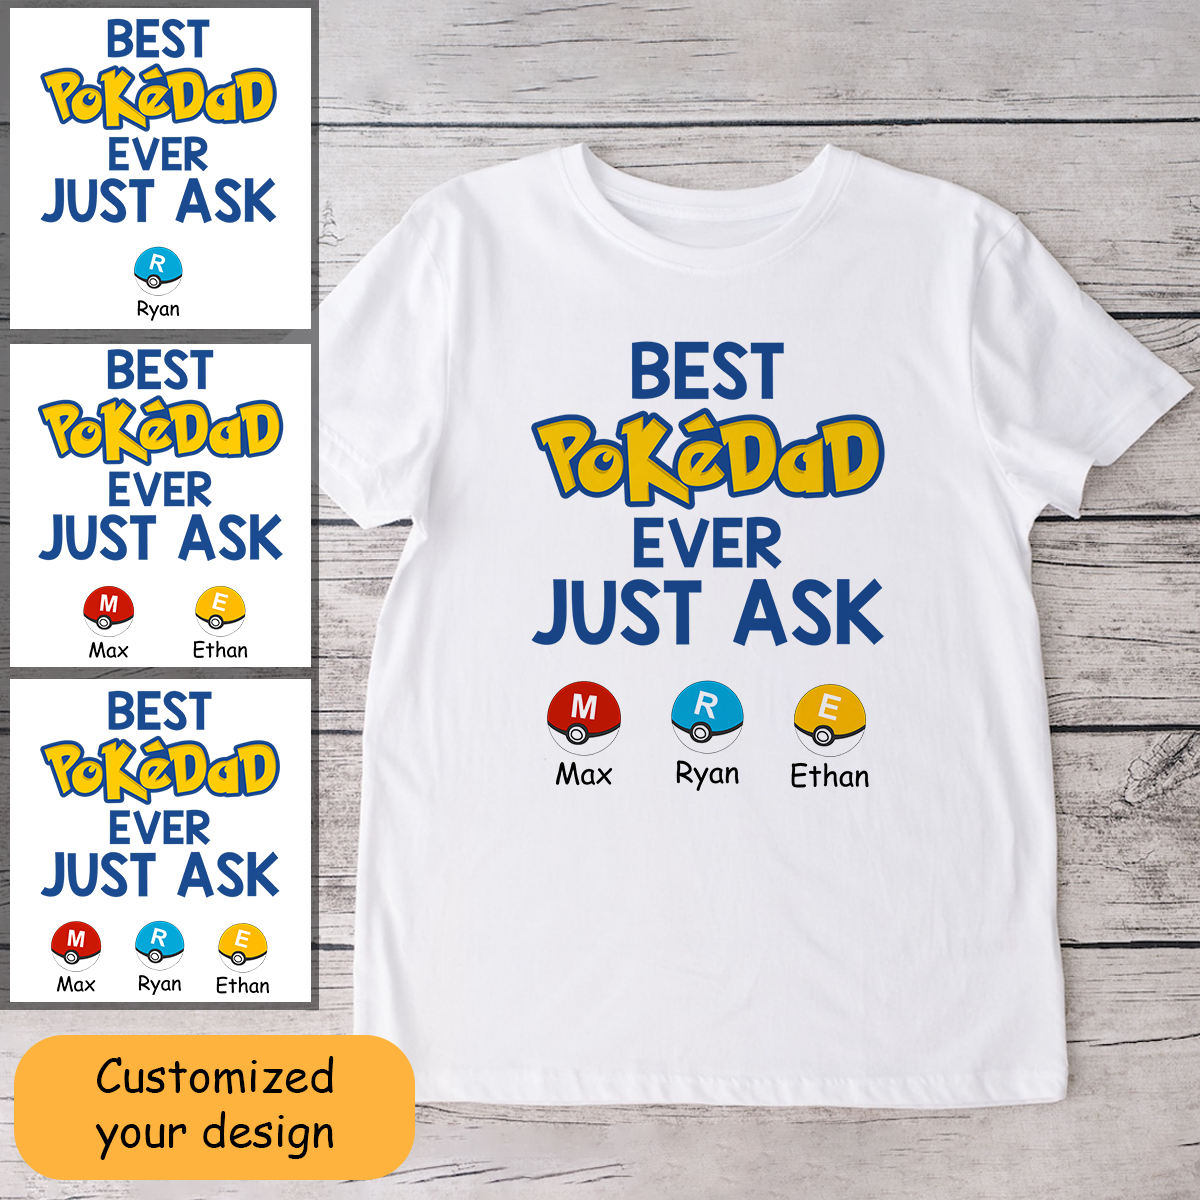 Best PokéDad Ever Just Ask - Personalized Shirt for Dad, for Husband, Customized Father's Day Gift